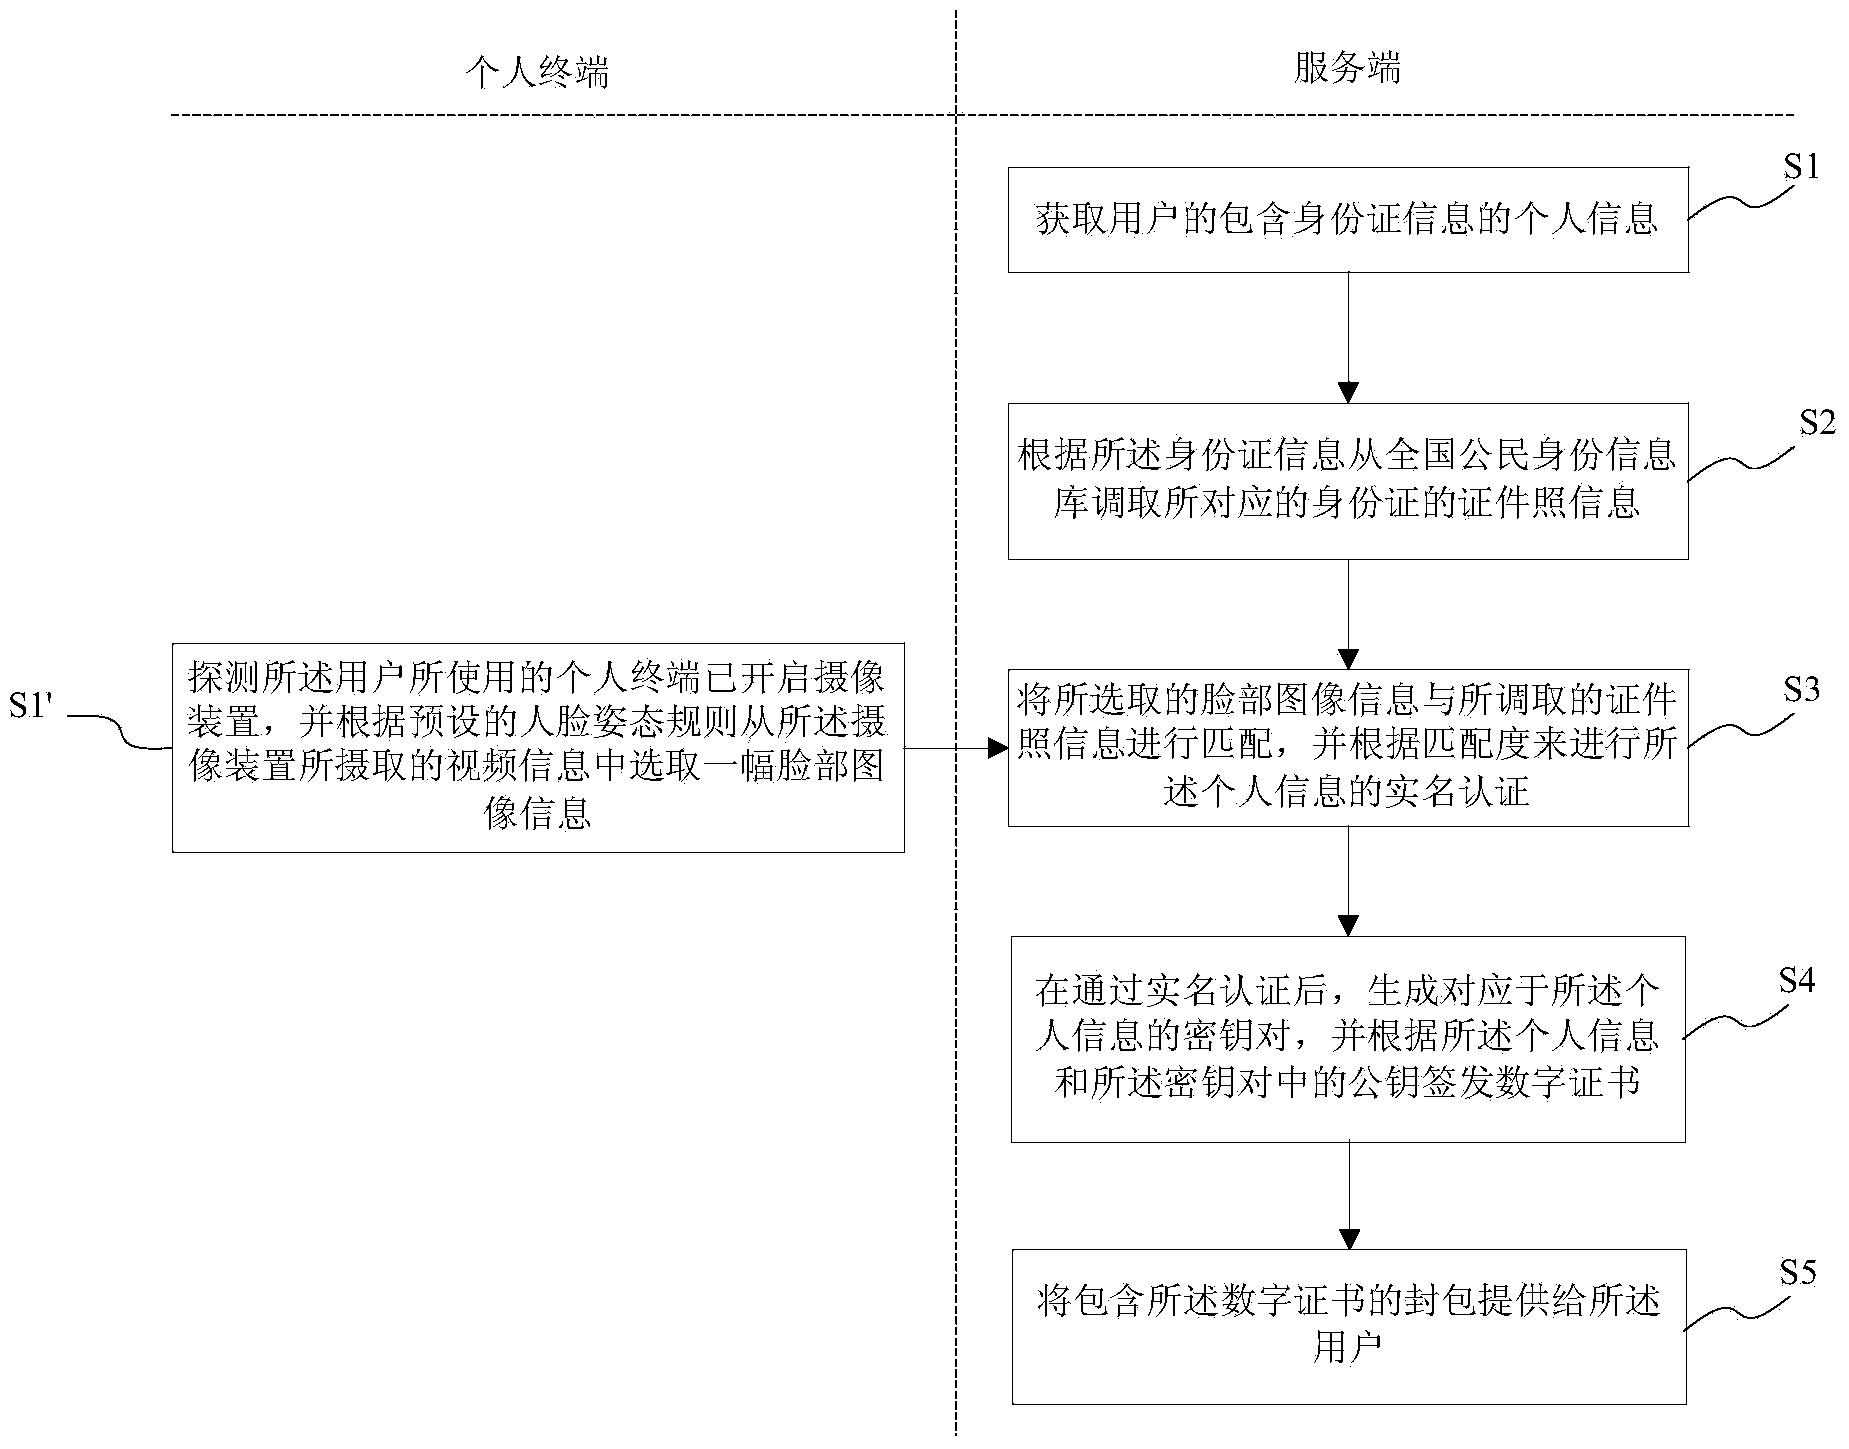 Off-site personal digital certificate application method and system